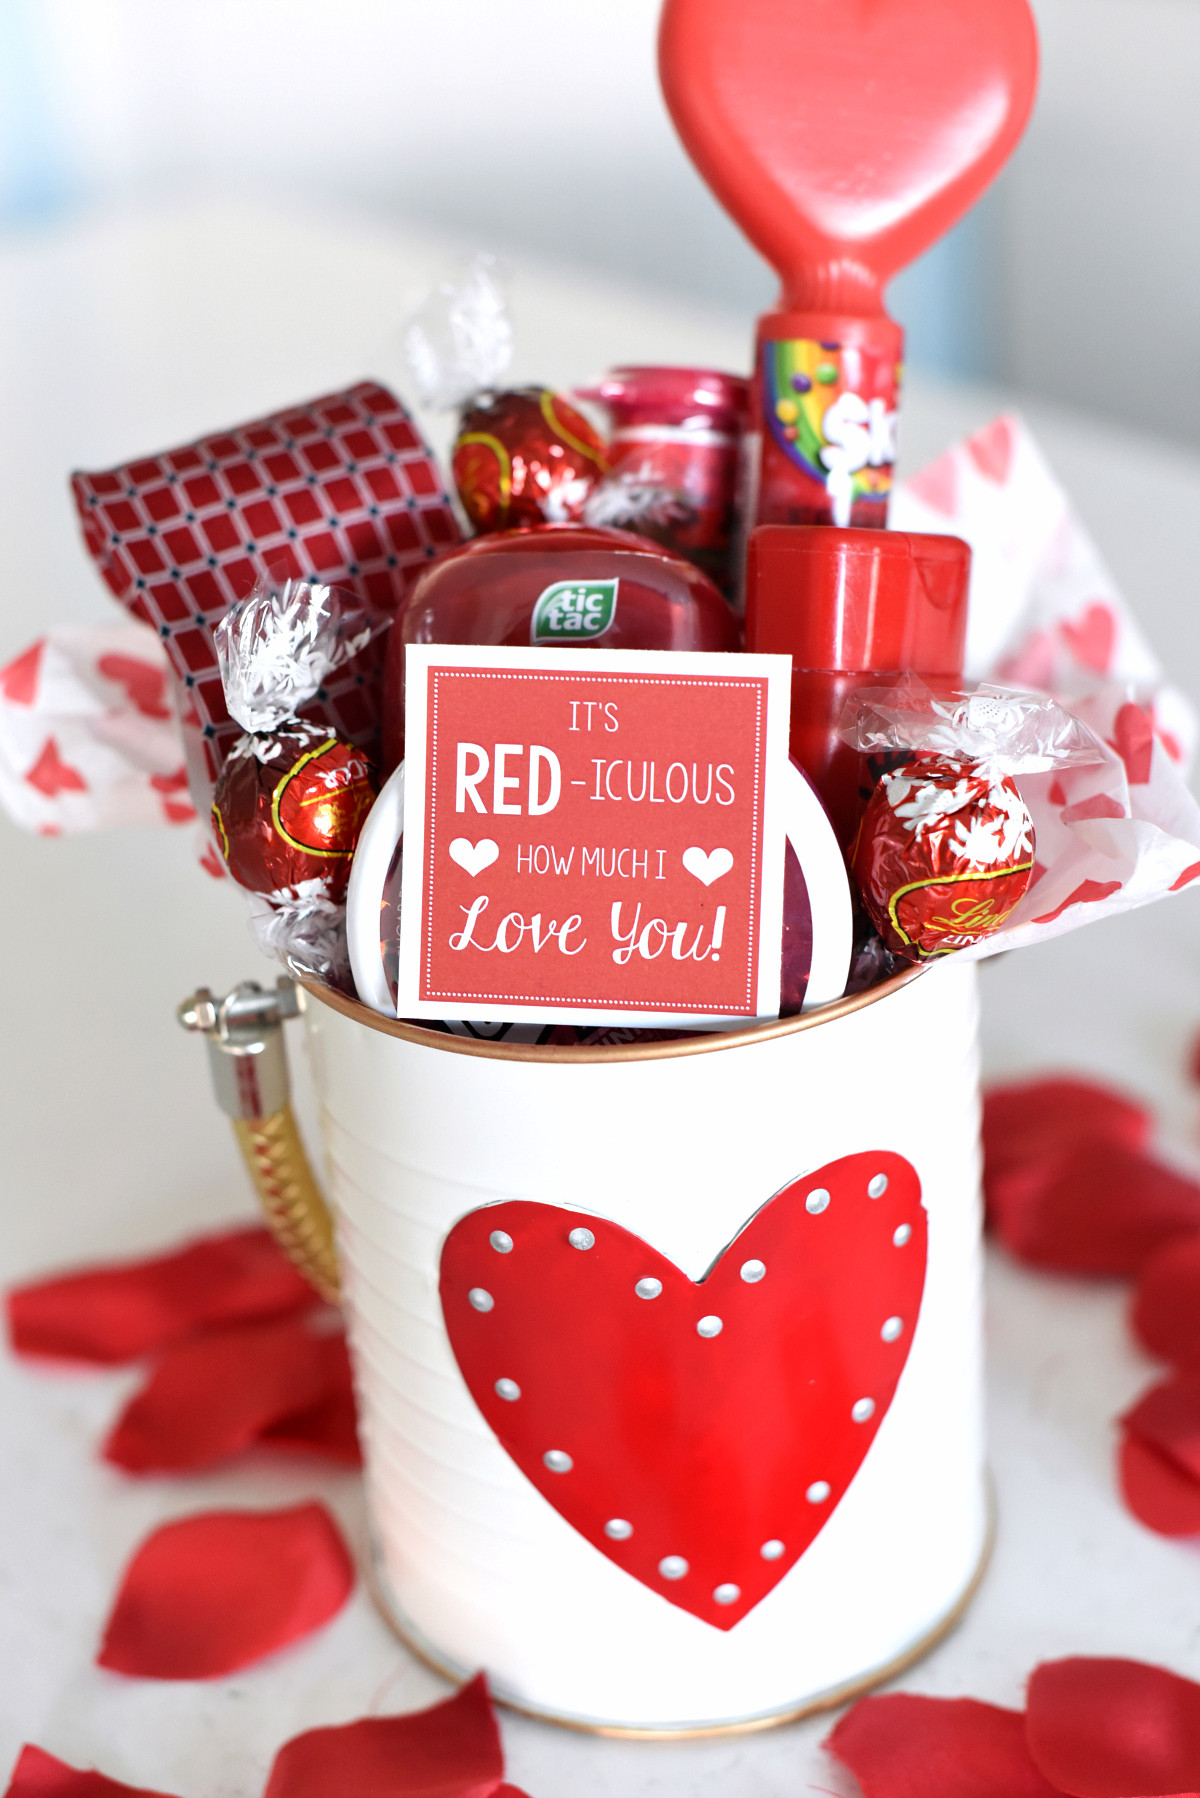 Home Made Gift Ideas for Valentines Day Inspirational 25 Diy Valentine S Day Gift Ideas Teens Will Love